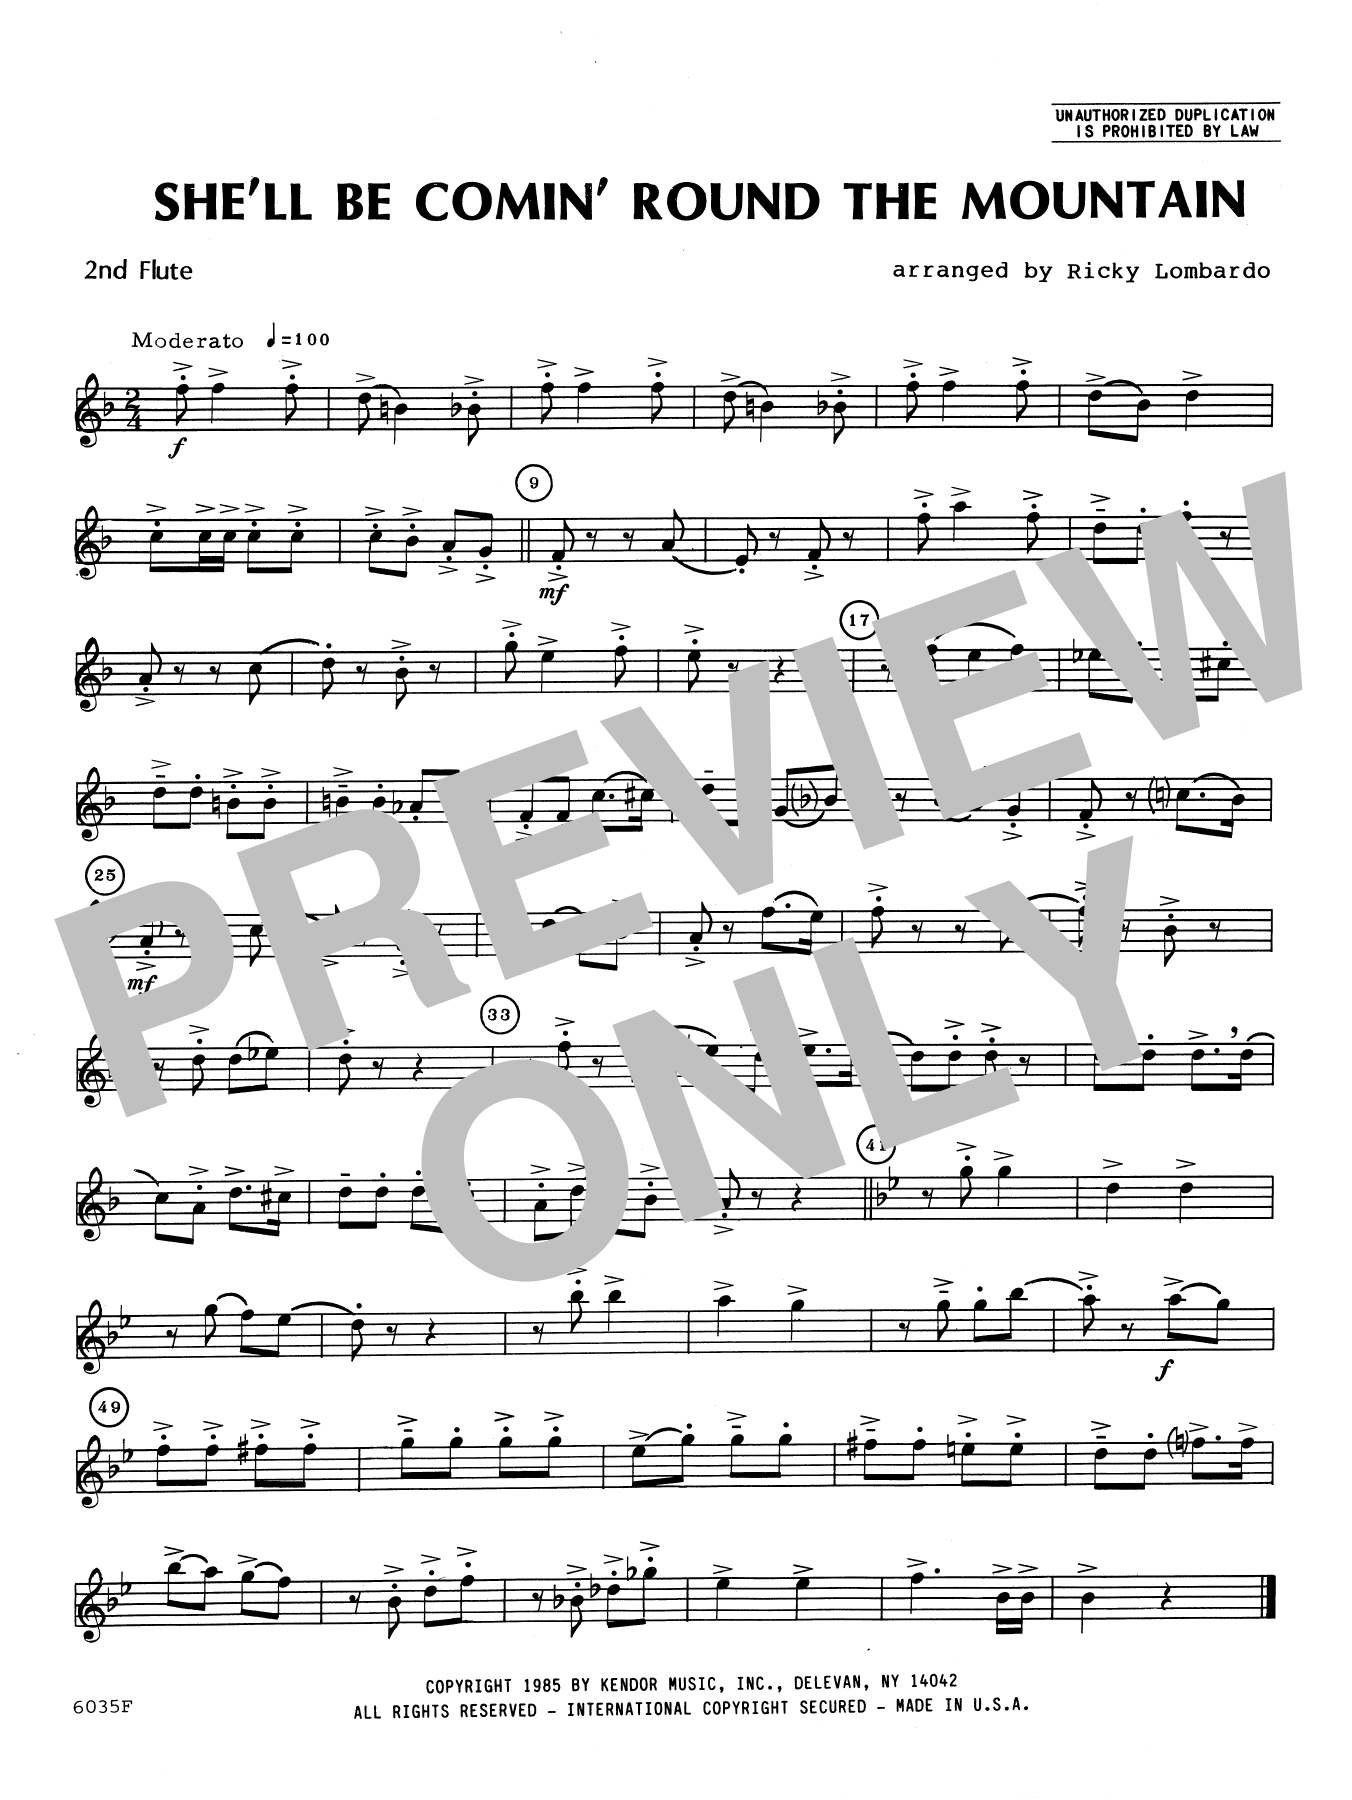 Download Ricky Lombardo She'll Be Comin' Round the Mountain - 2 Sheet Music